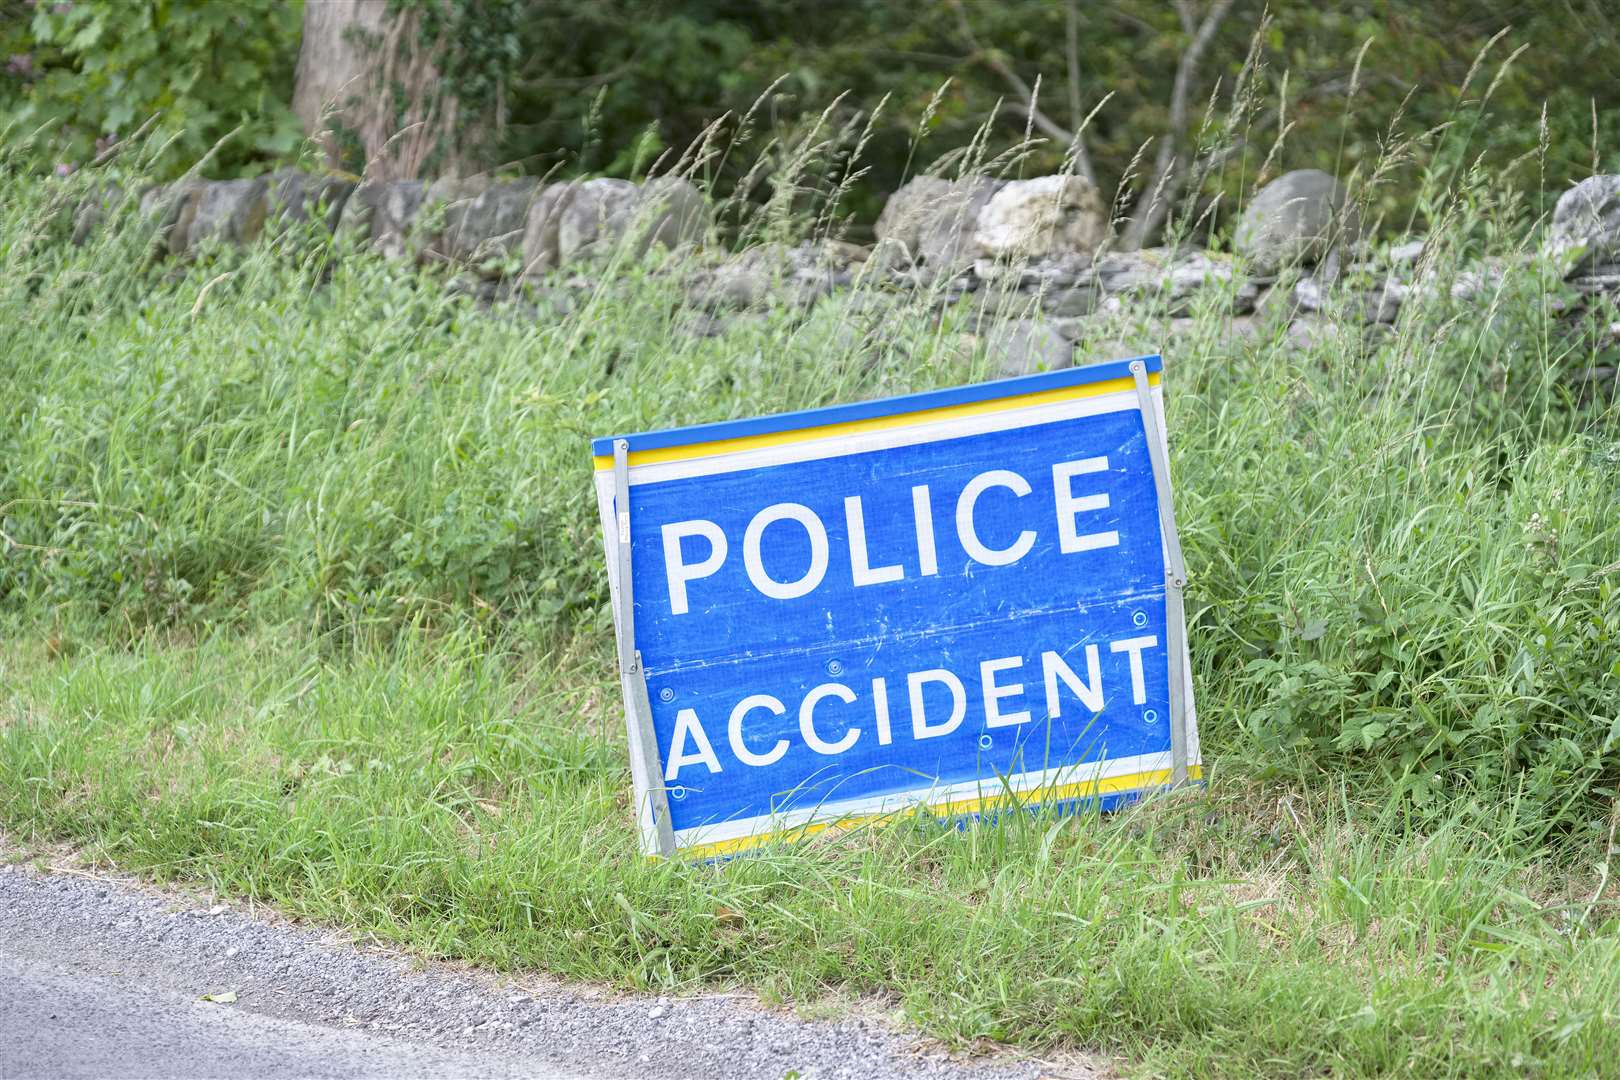 A man was airlifted to hospital after an accident near Fochabers.